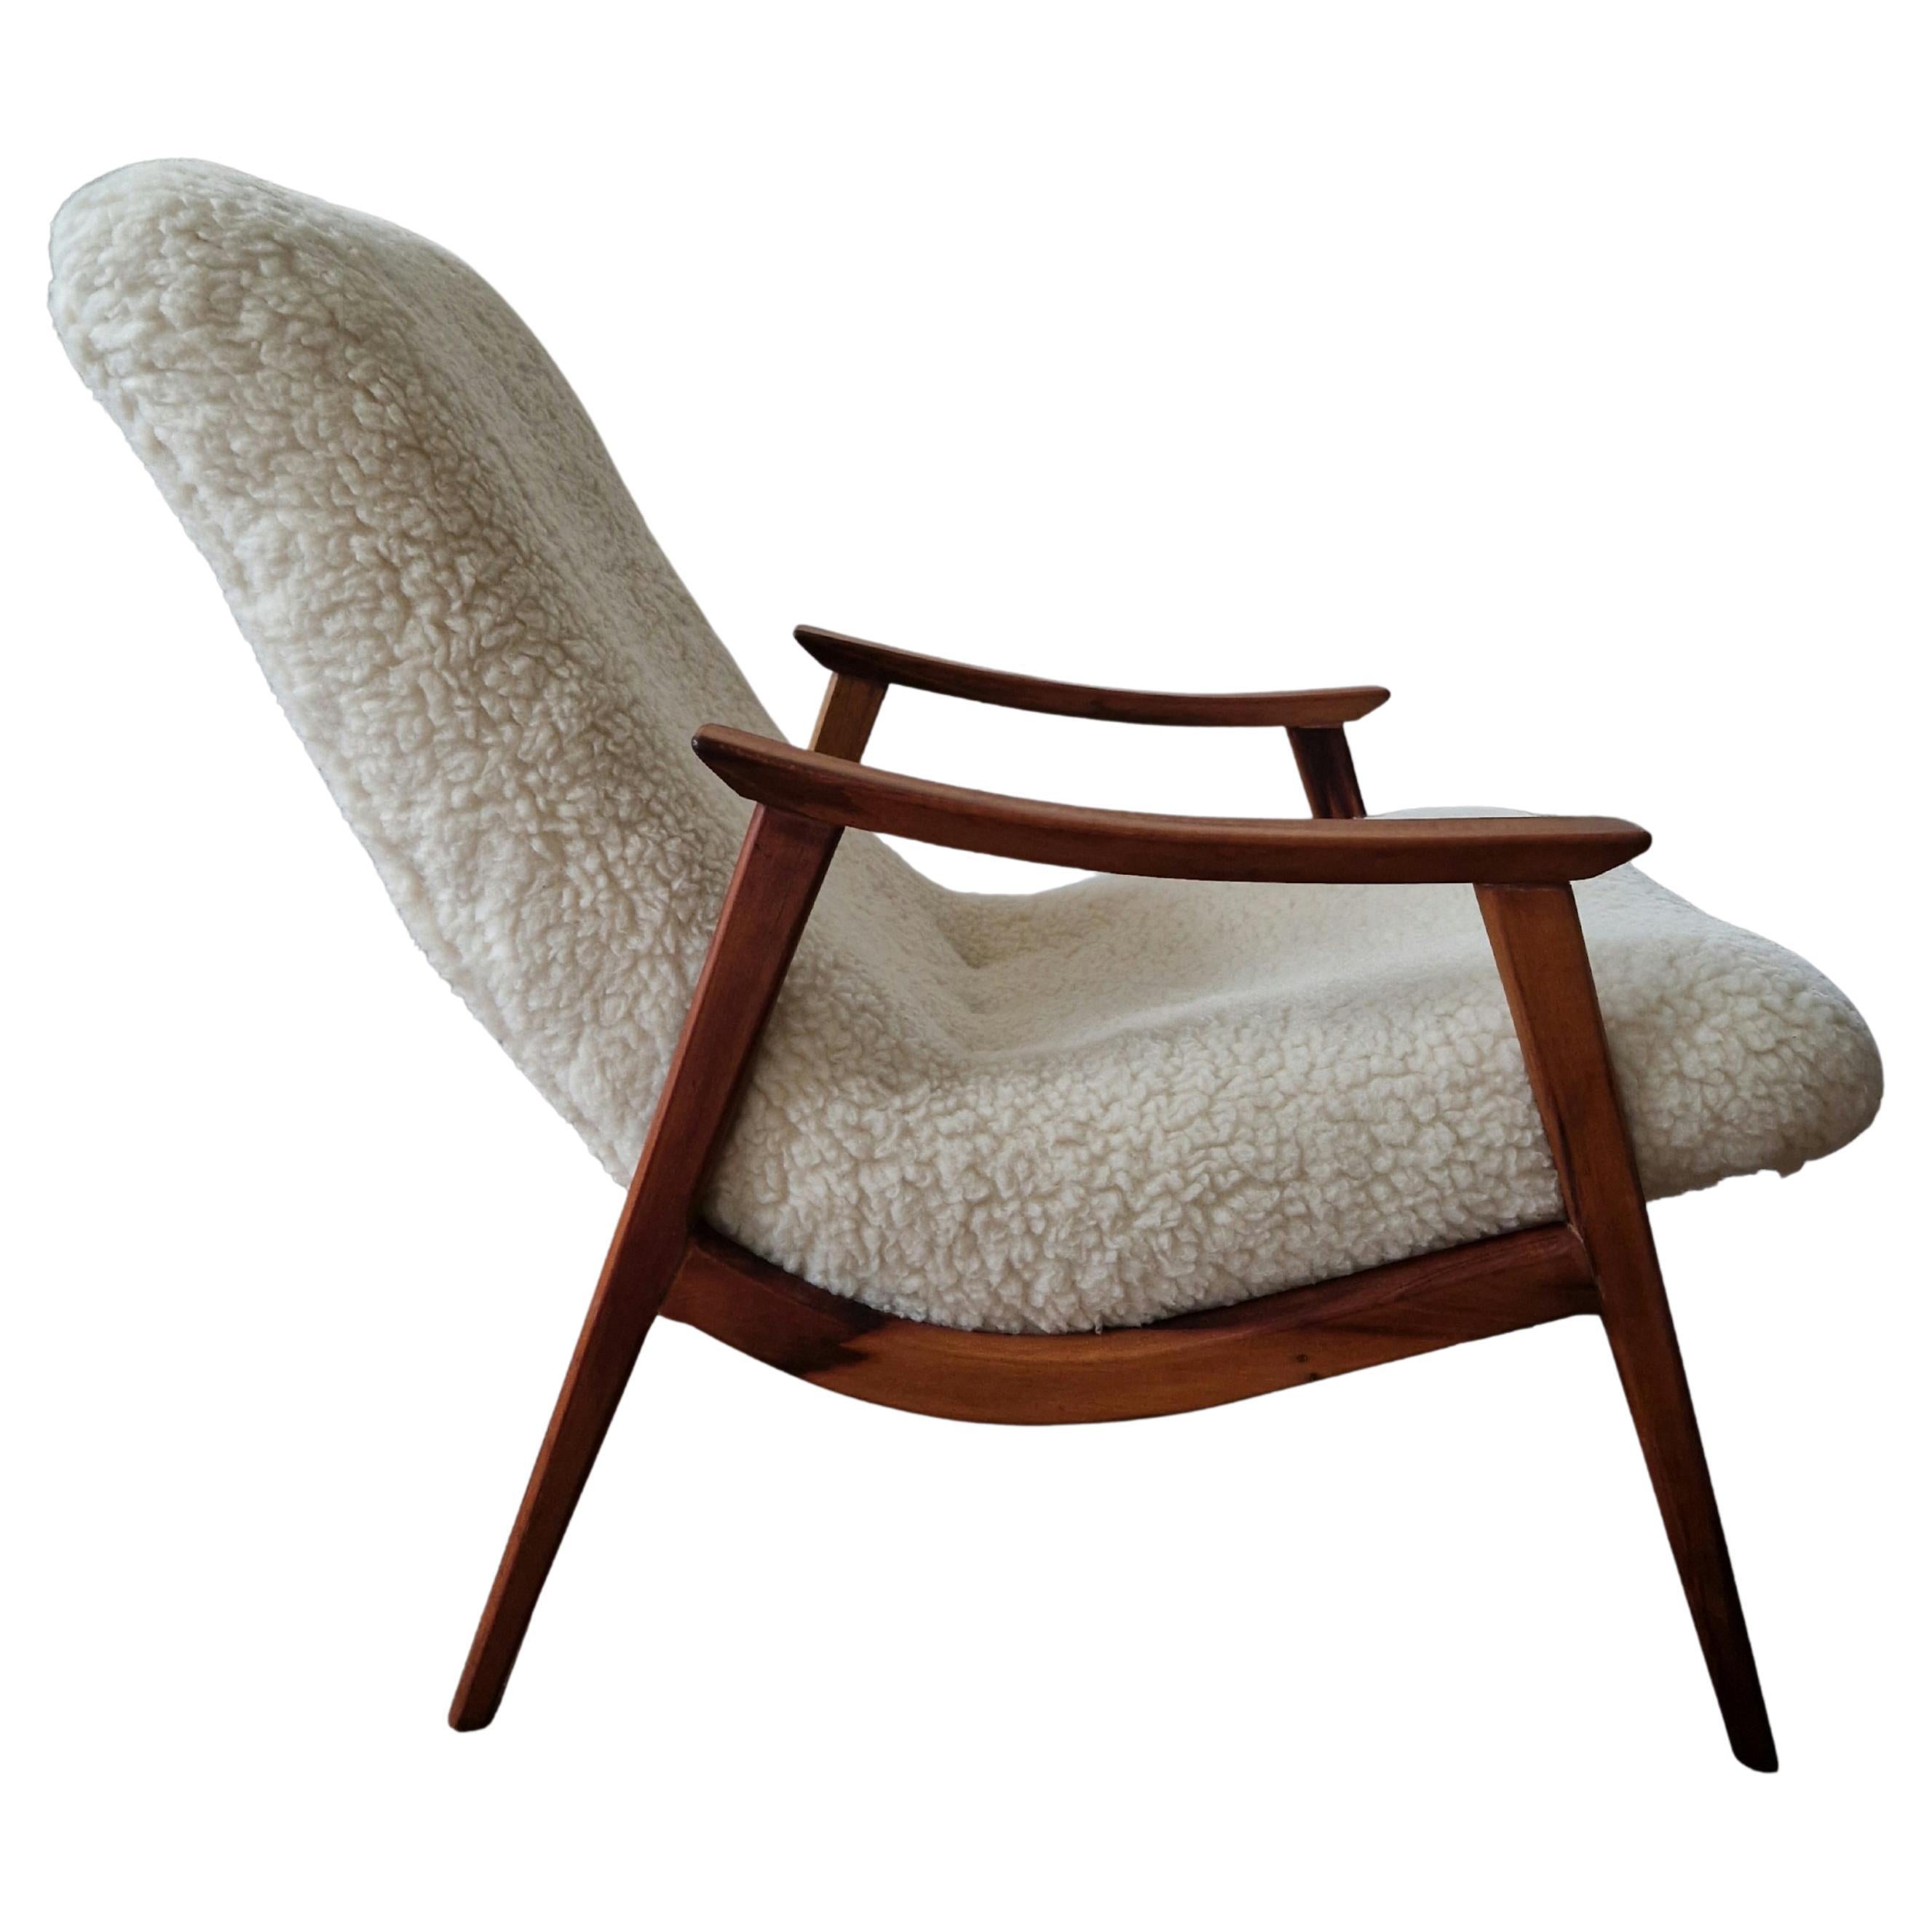 Mid century rosewood lounge chair by Gelli, Brazil 1950s For Sale